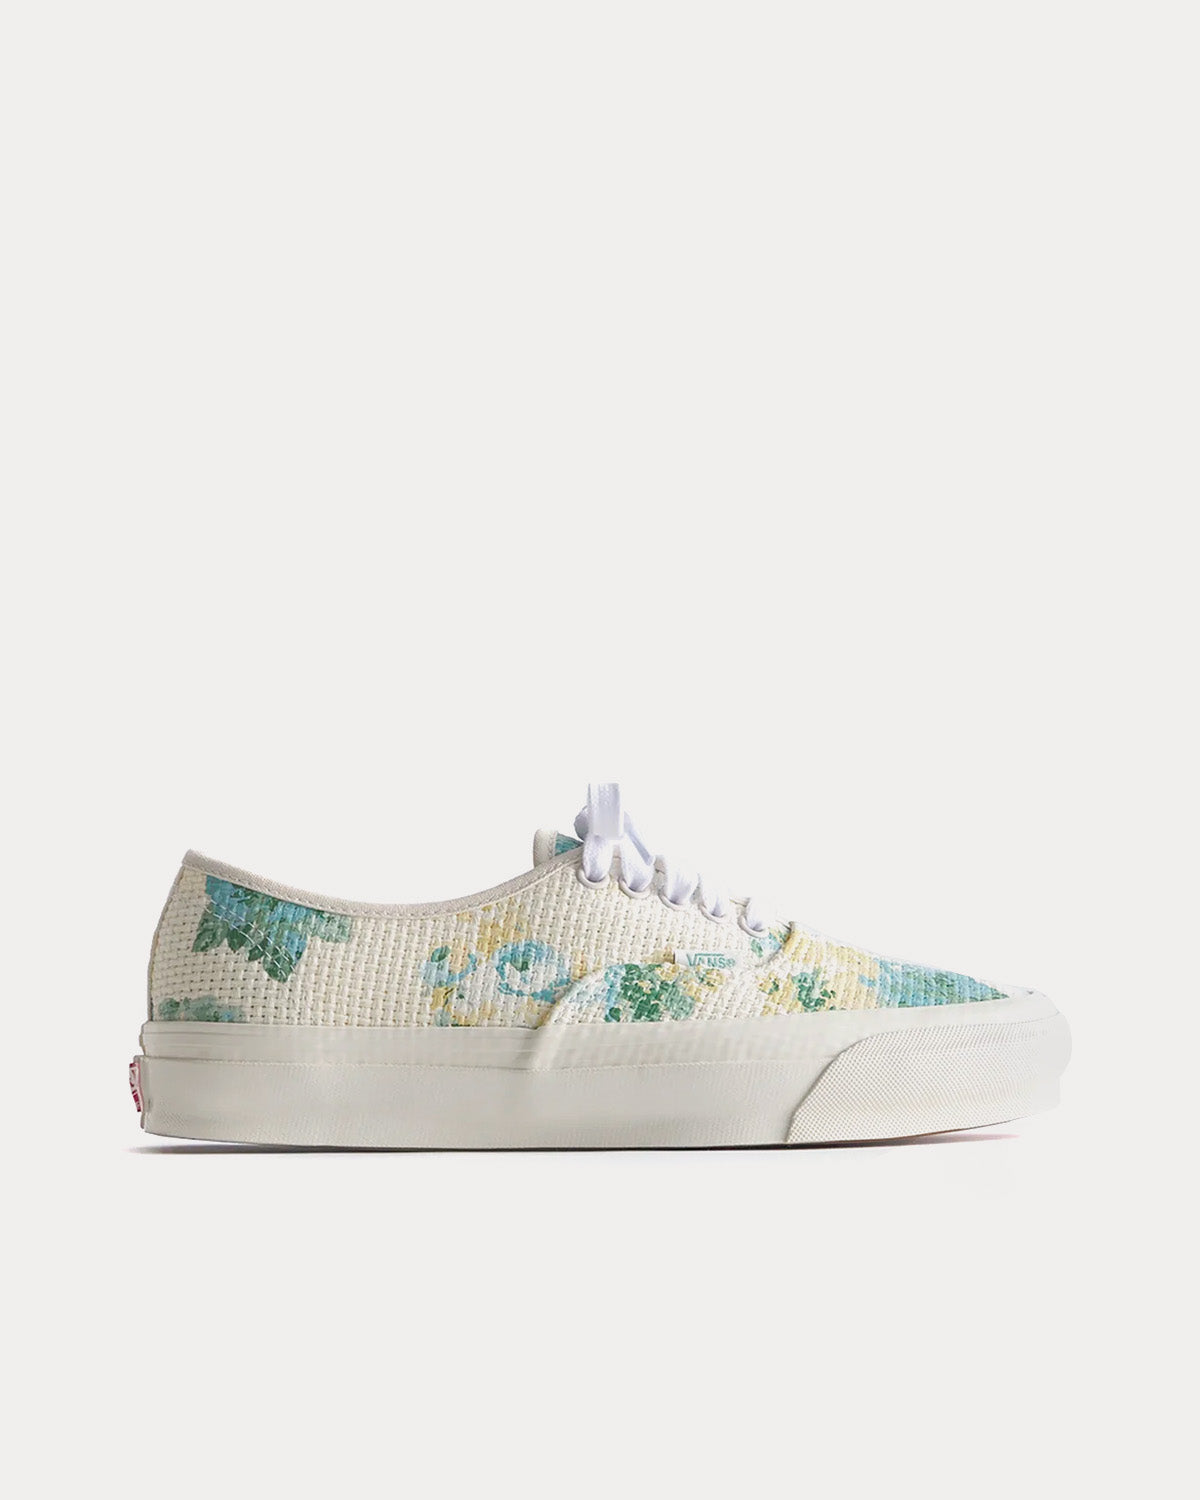 Vans x Kith - Vintage Floral OG Authentic LX Turtledove Low Top Sneakers